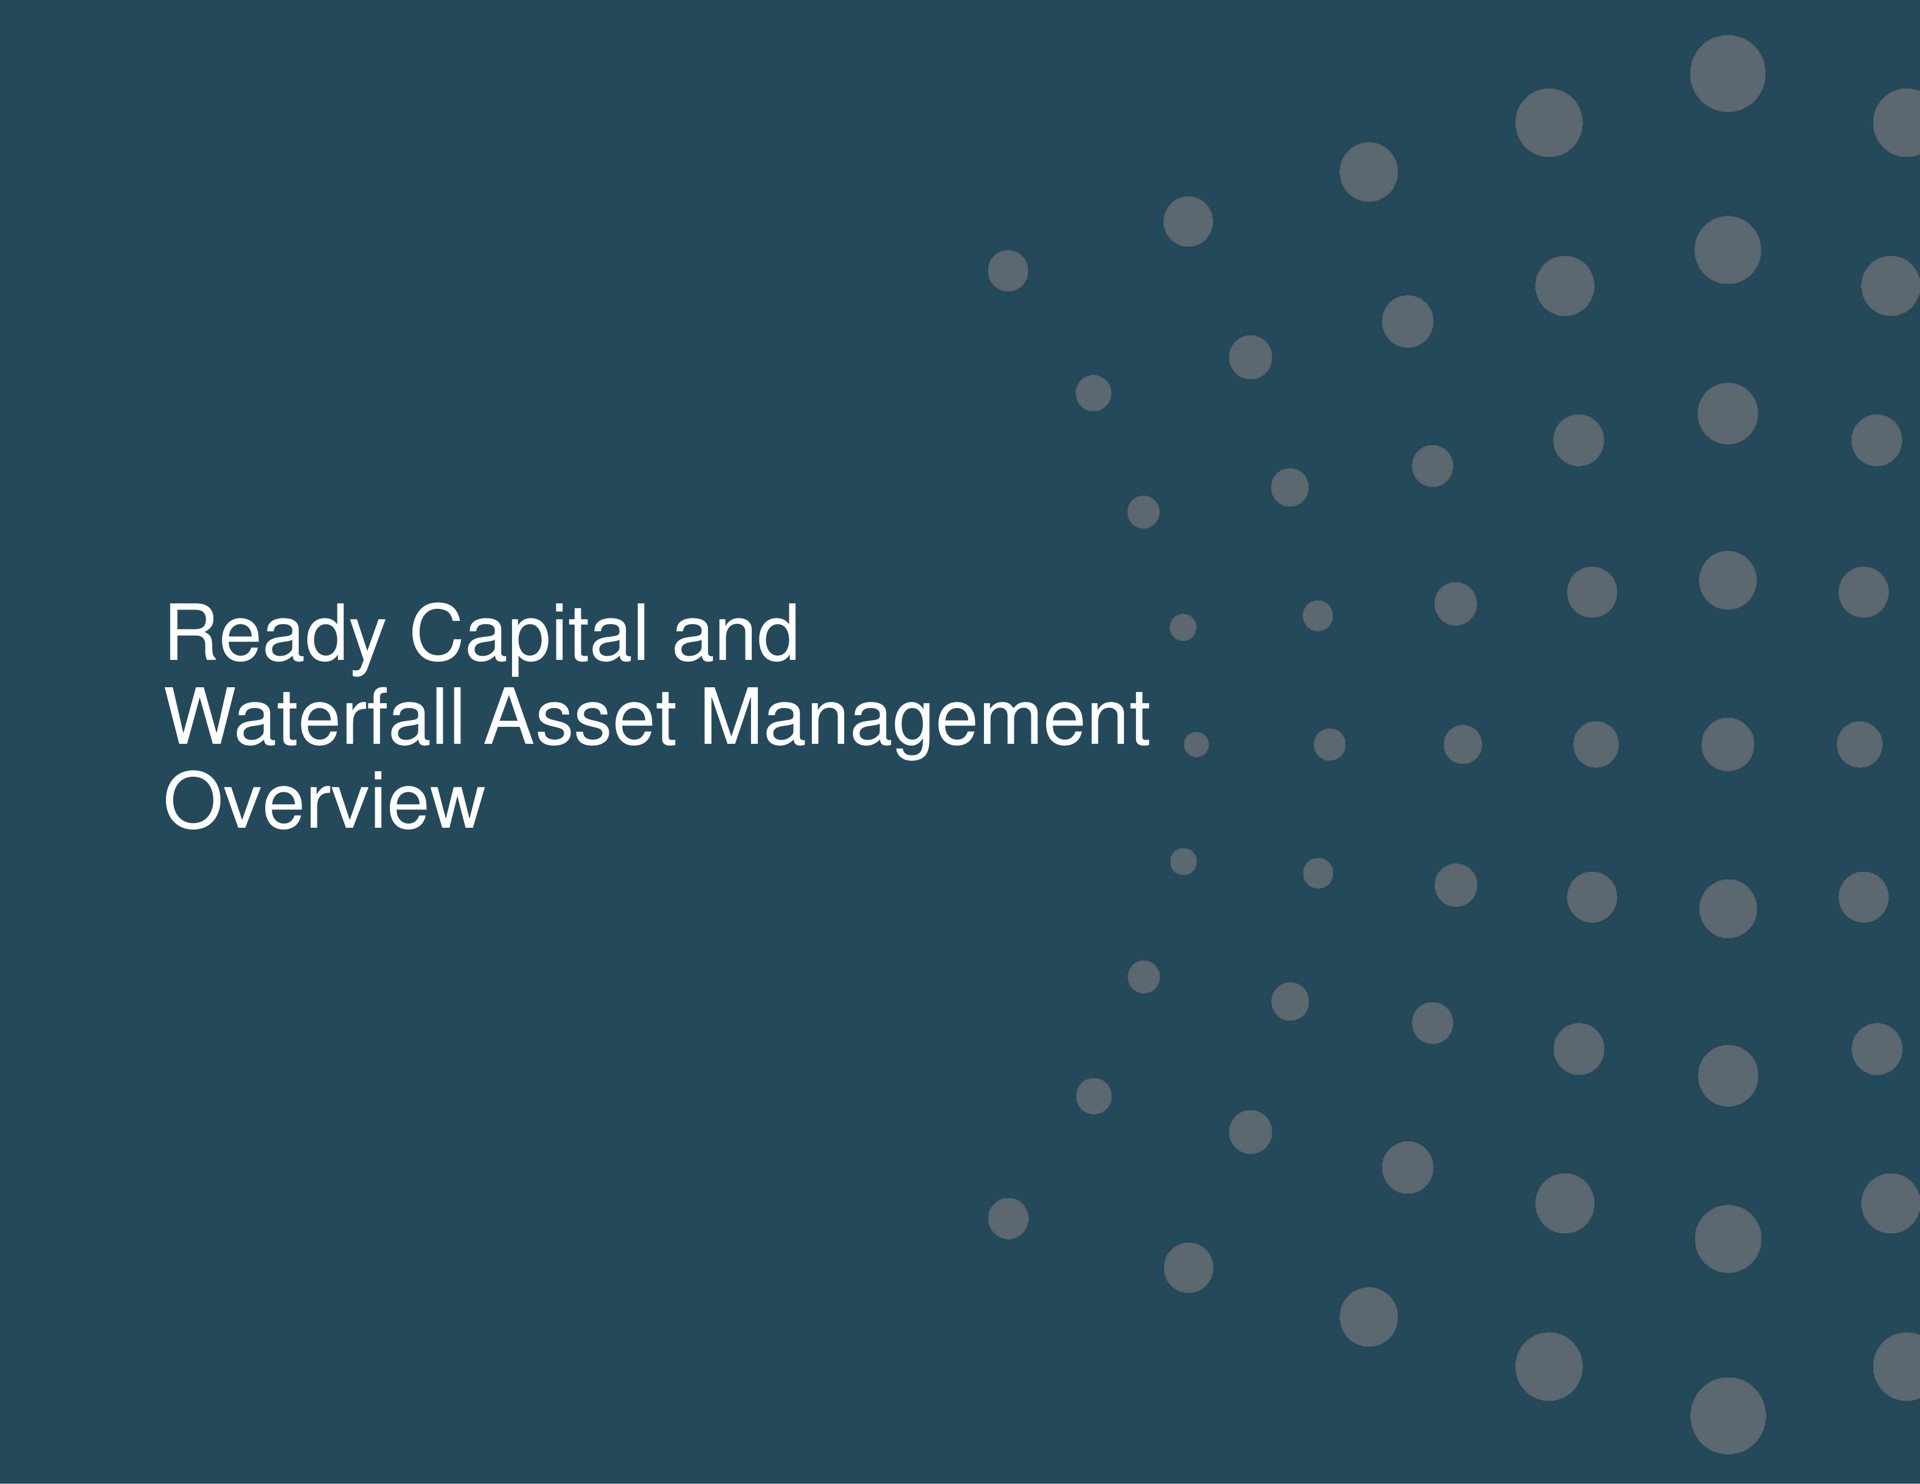 ready capital and waterfall asset management overview | Ready Capital